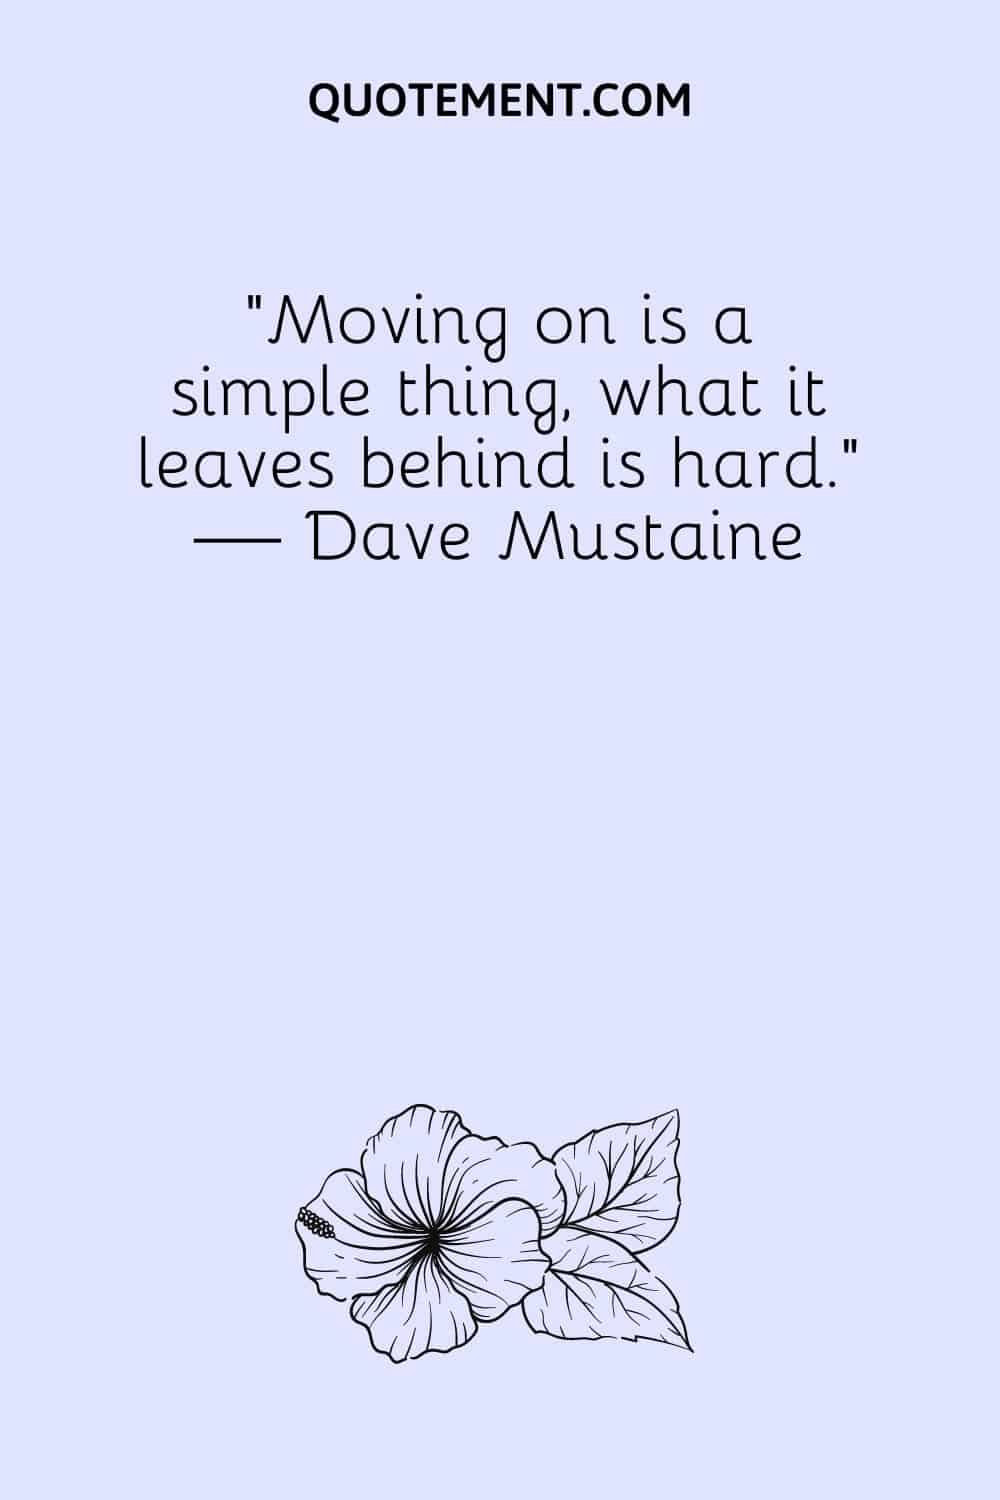 Moving on is a simple thing, what it leaves behind is hard